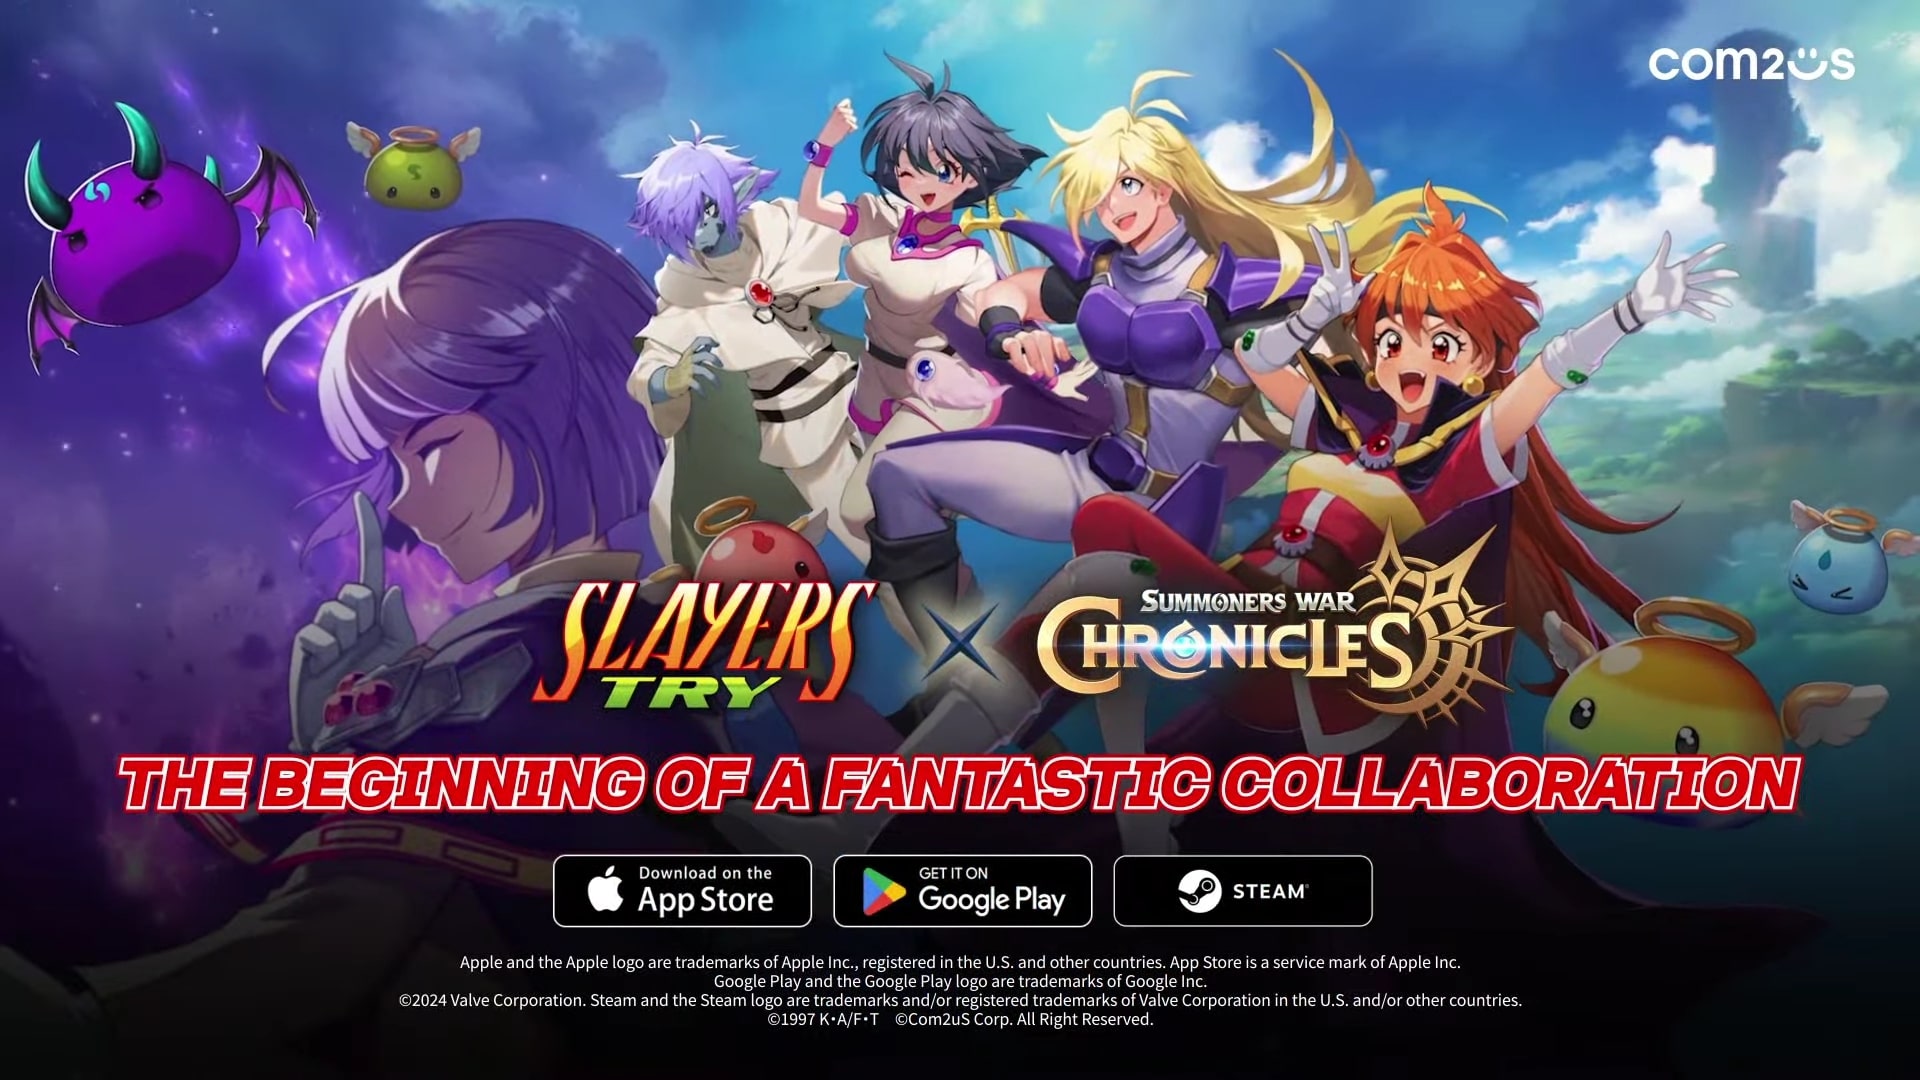 Lina Joins "Summoners War: Chronicles" Anniversary with Slayers TRY!